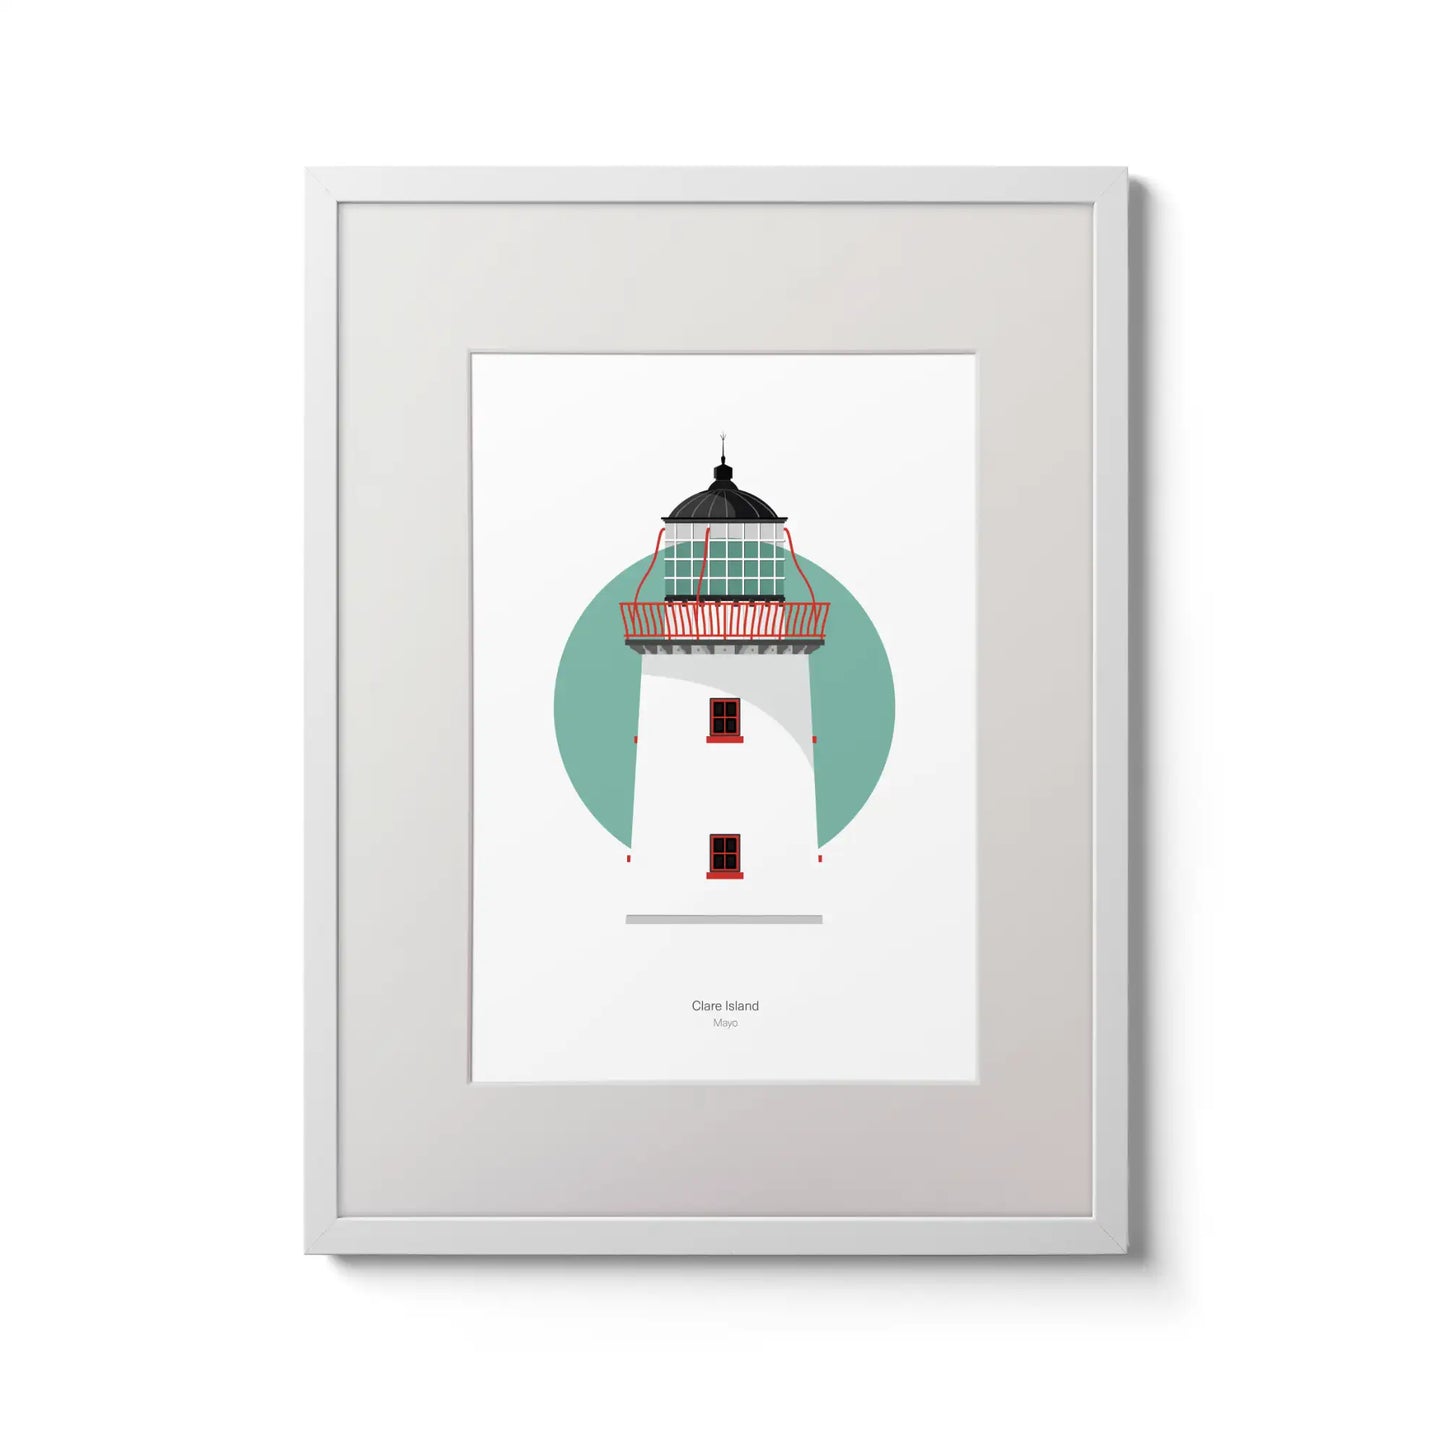 Illustration of Clare Island lighthouse on a white background inside light blue square,  in a white frame measuring 30x40cm.